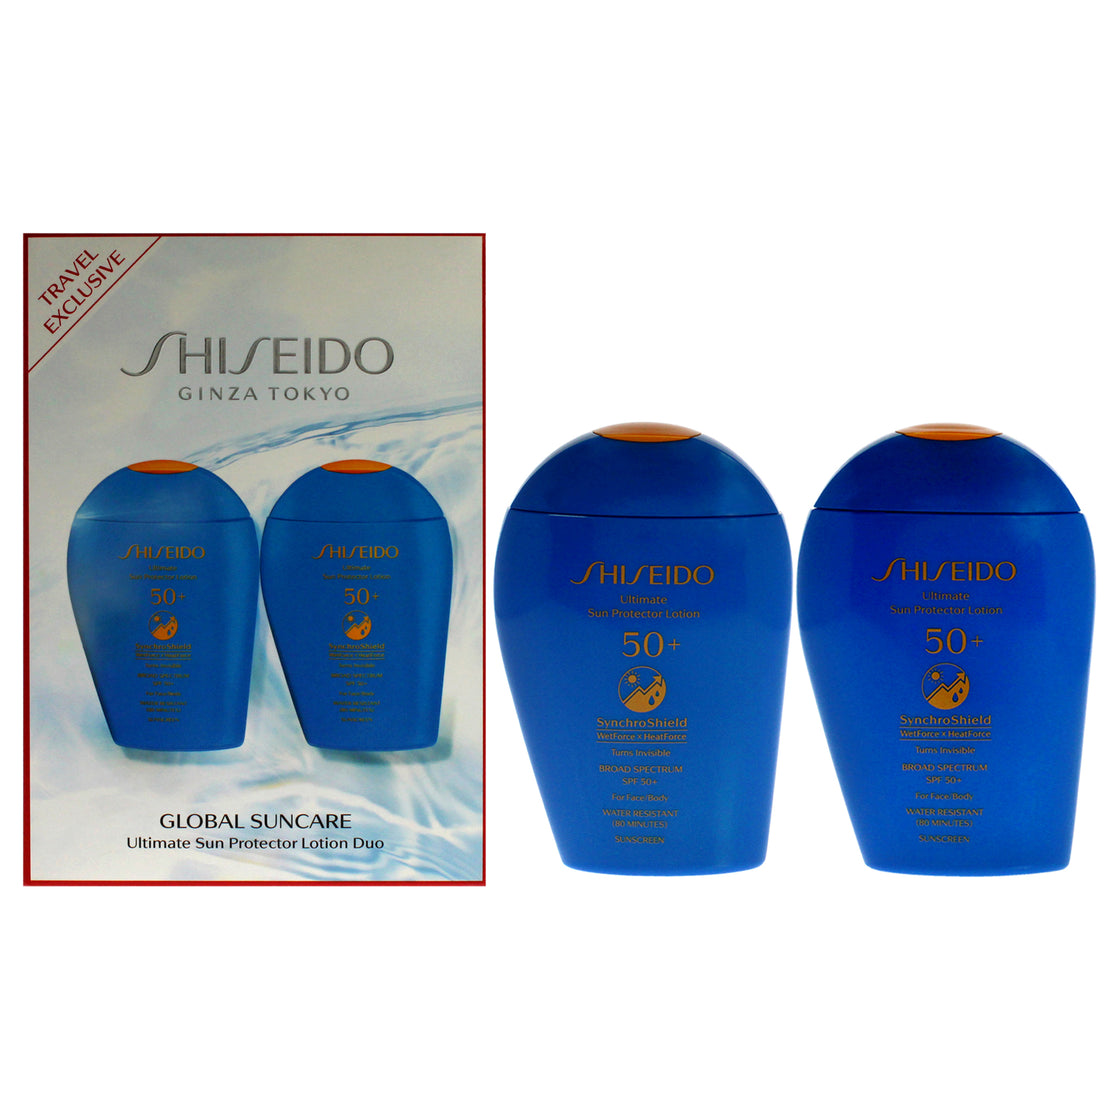 Ultimate Sun Protector Lotion SPF 50 Plus Duo by Shiseido for Women - 2 x 5 oz Lotion